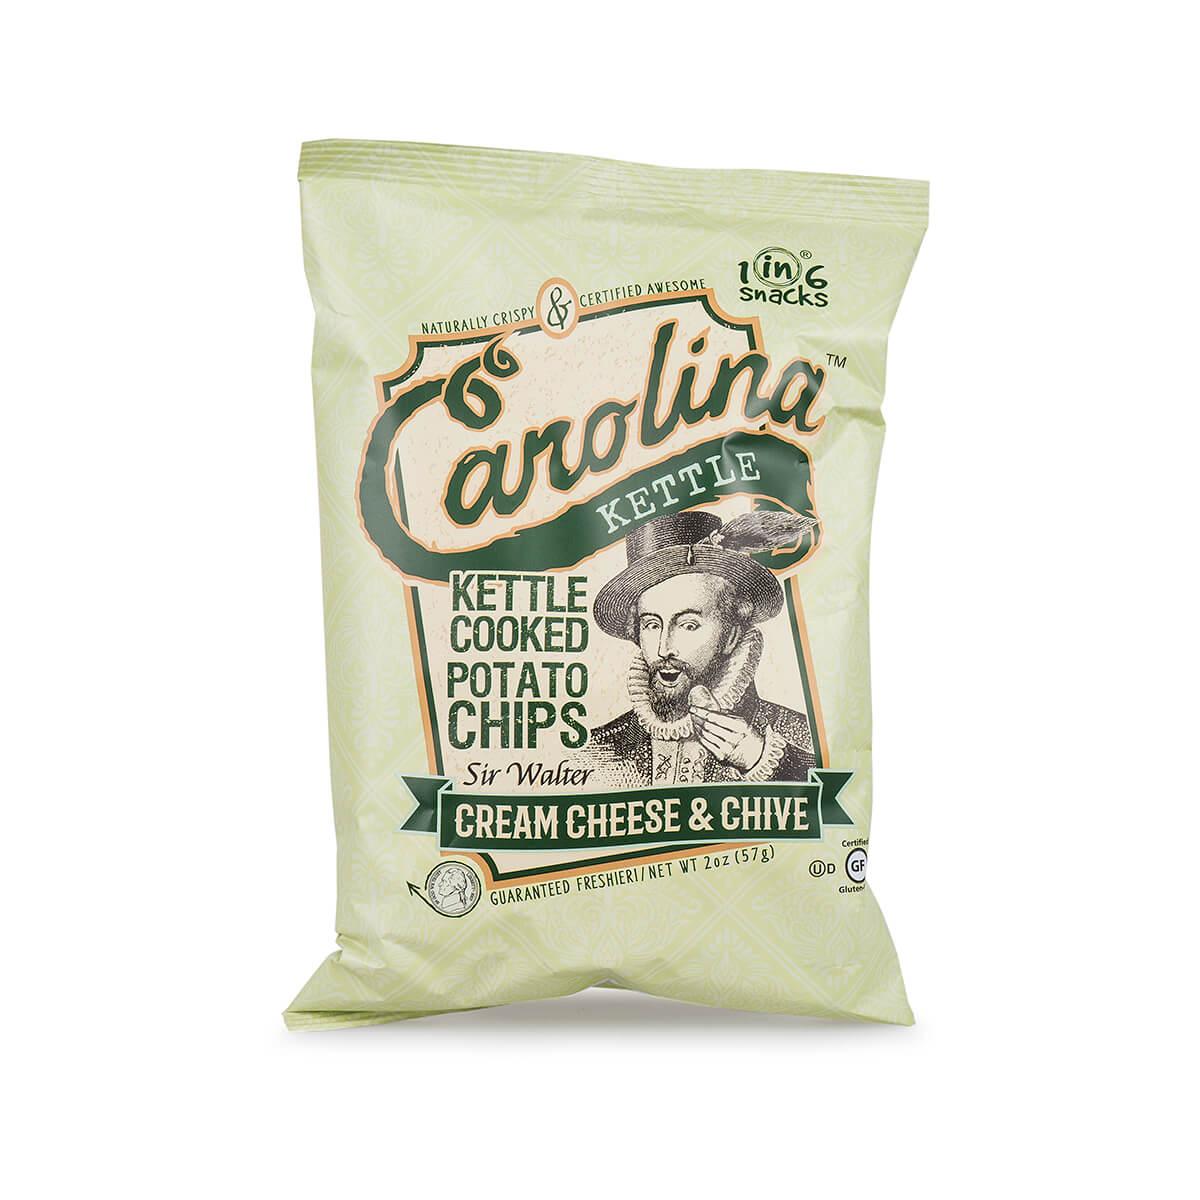  Sir Walter Cream Cheese & Chive Potato Chips - 2 Ounce